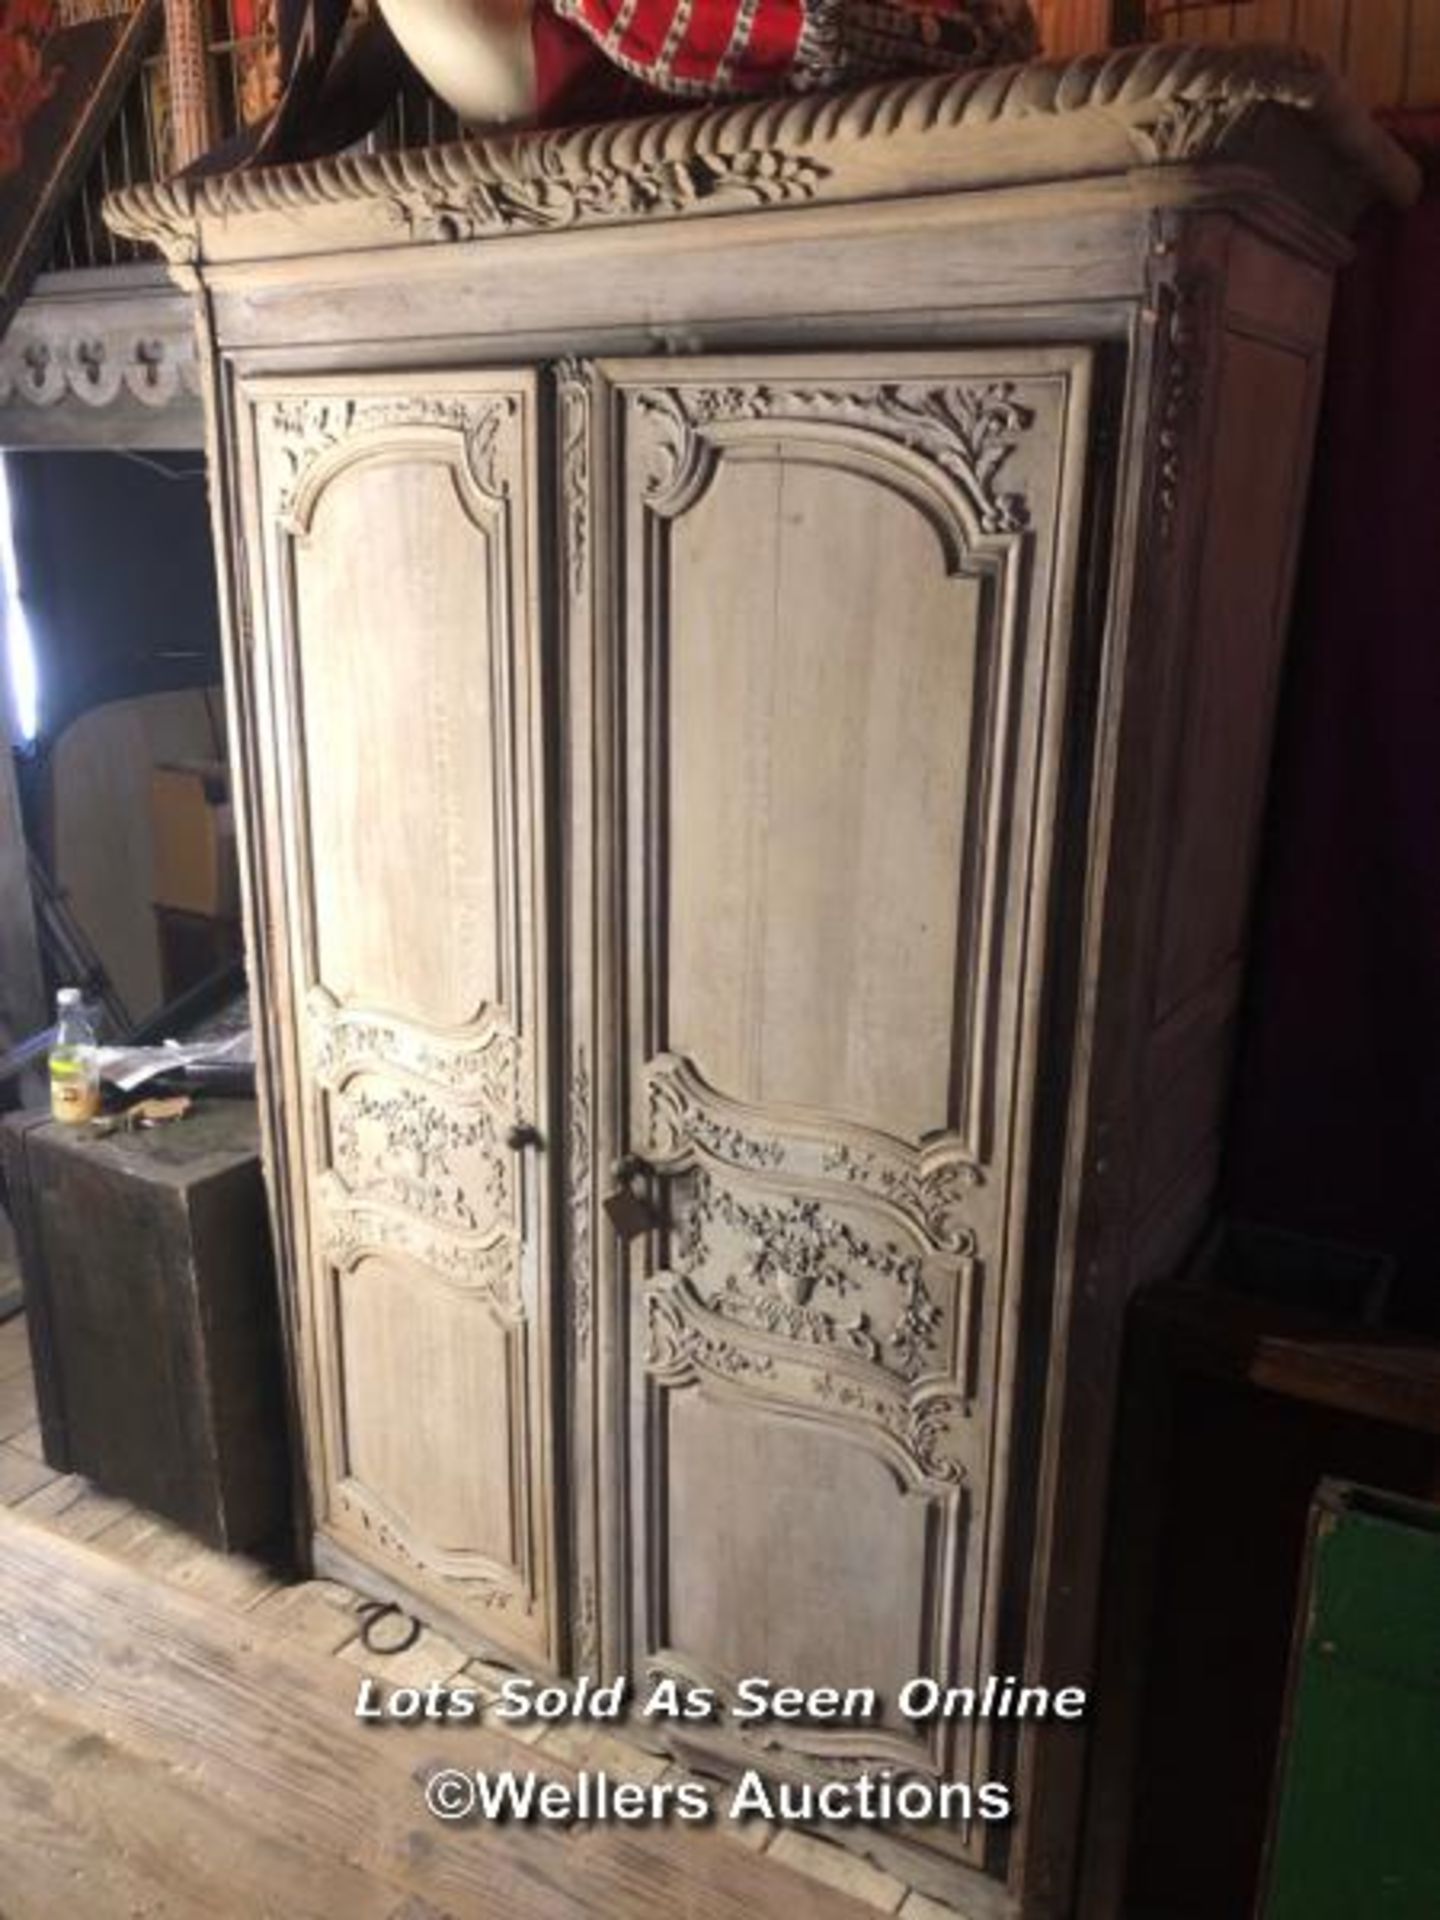 EARLY 19TH CENTURTY FRENCH ARMOIRE WITH BLEACHED OAK, 155 X 64 X 245CM, DISASSEMBLES FOR TRANSPORT